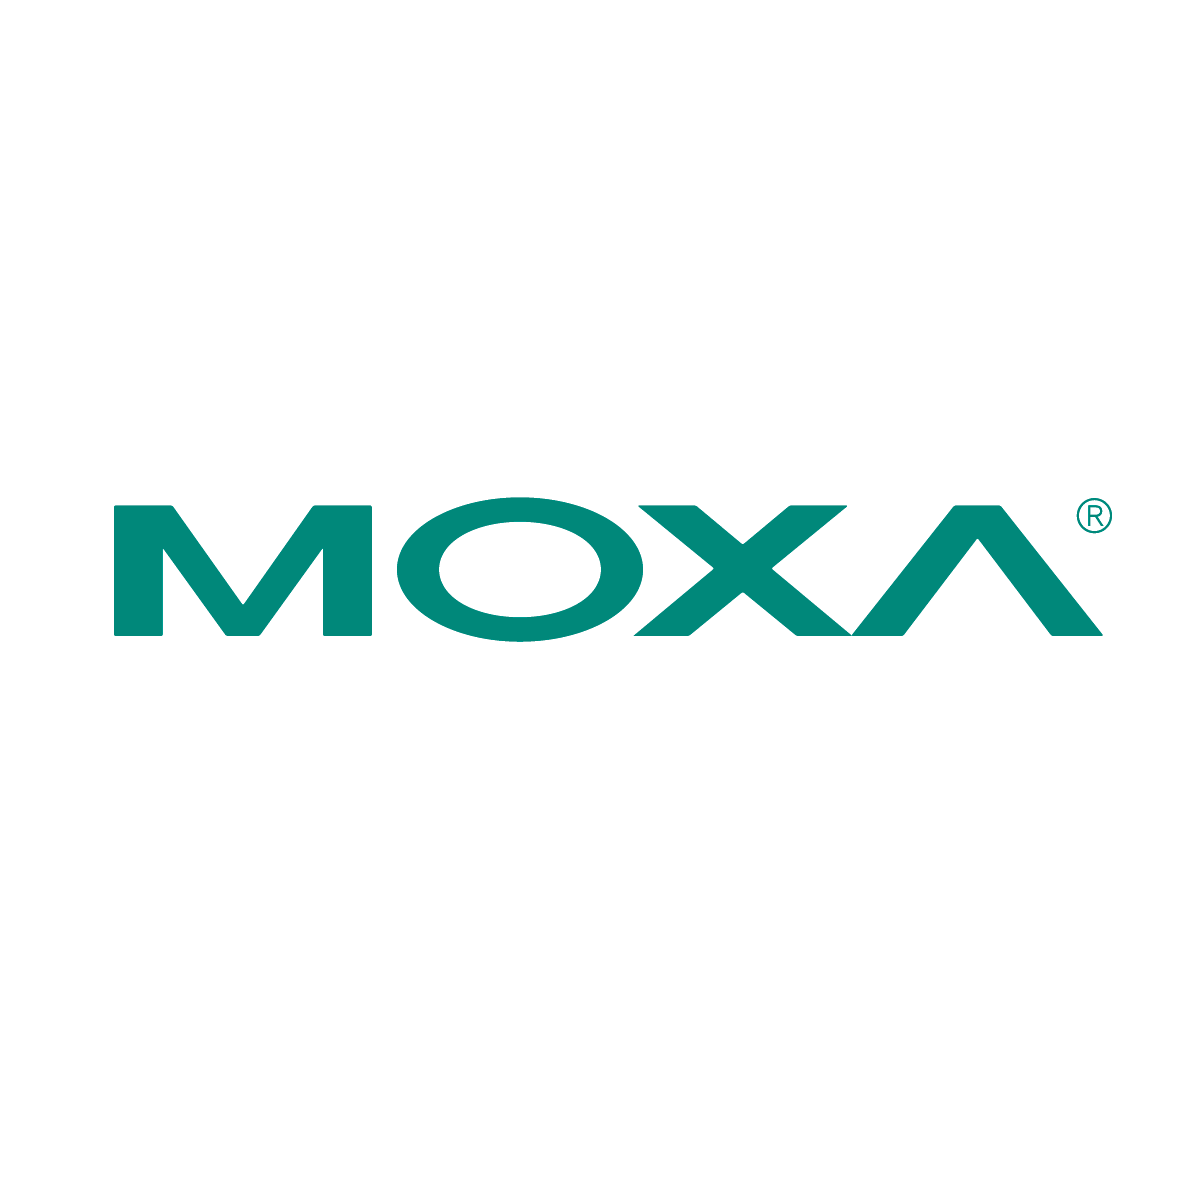 Moxa - Your Trusted Partner in Automation